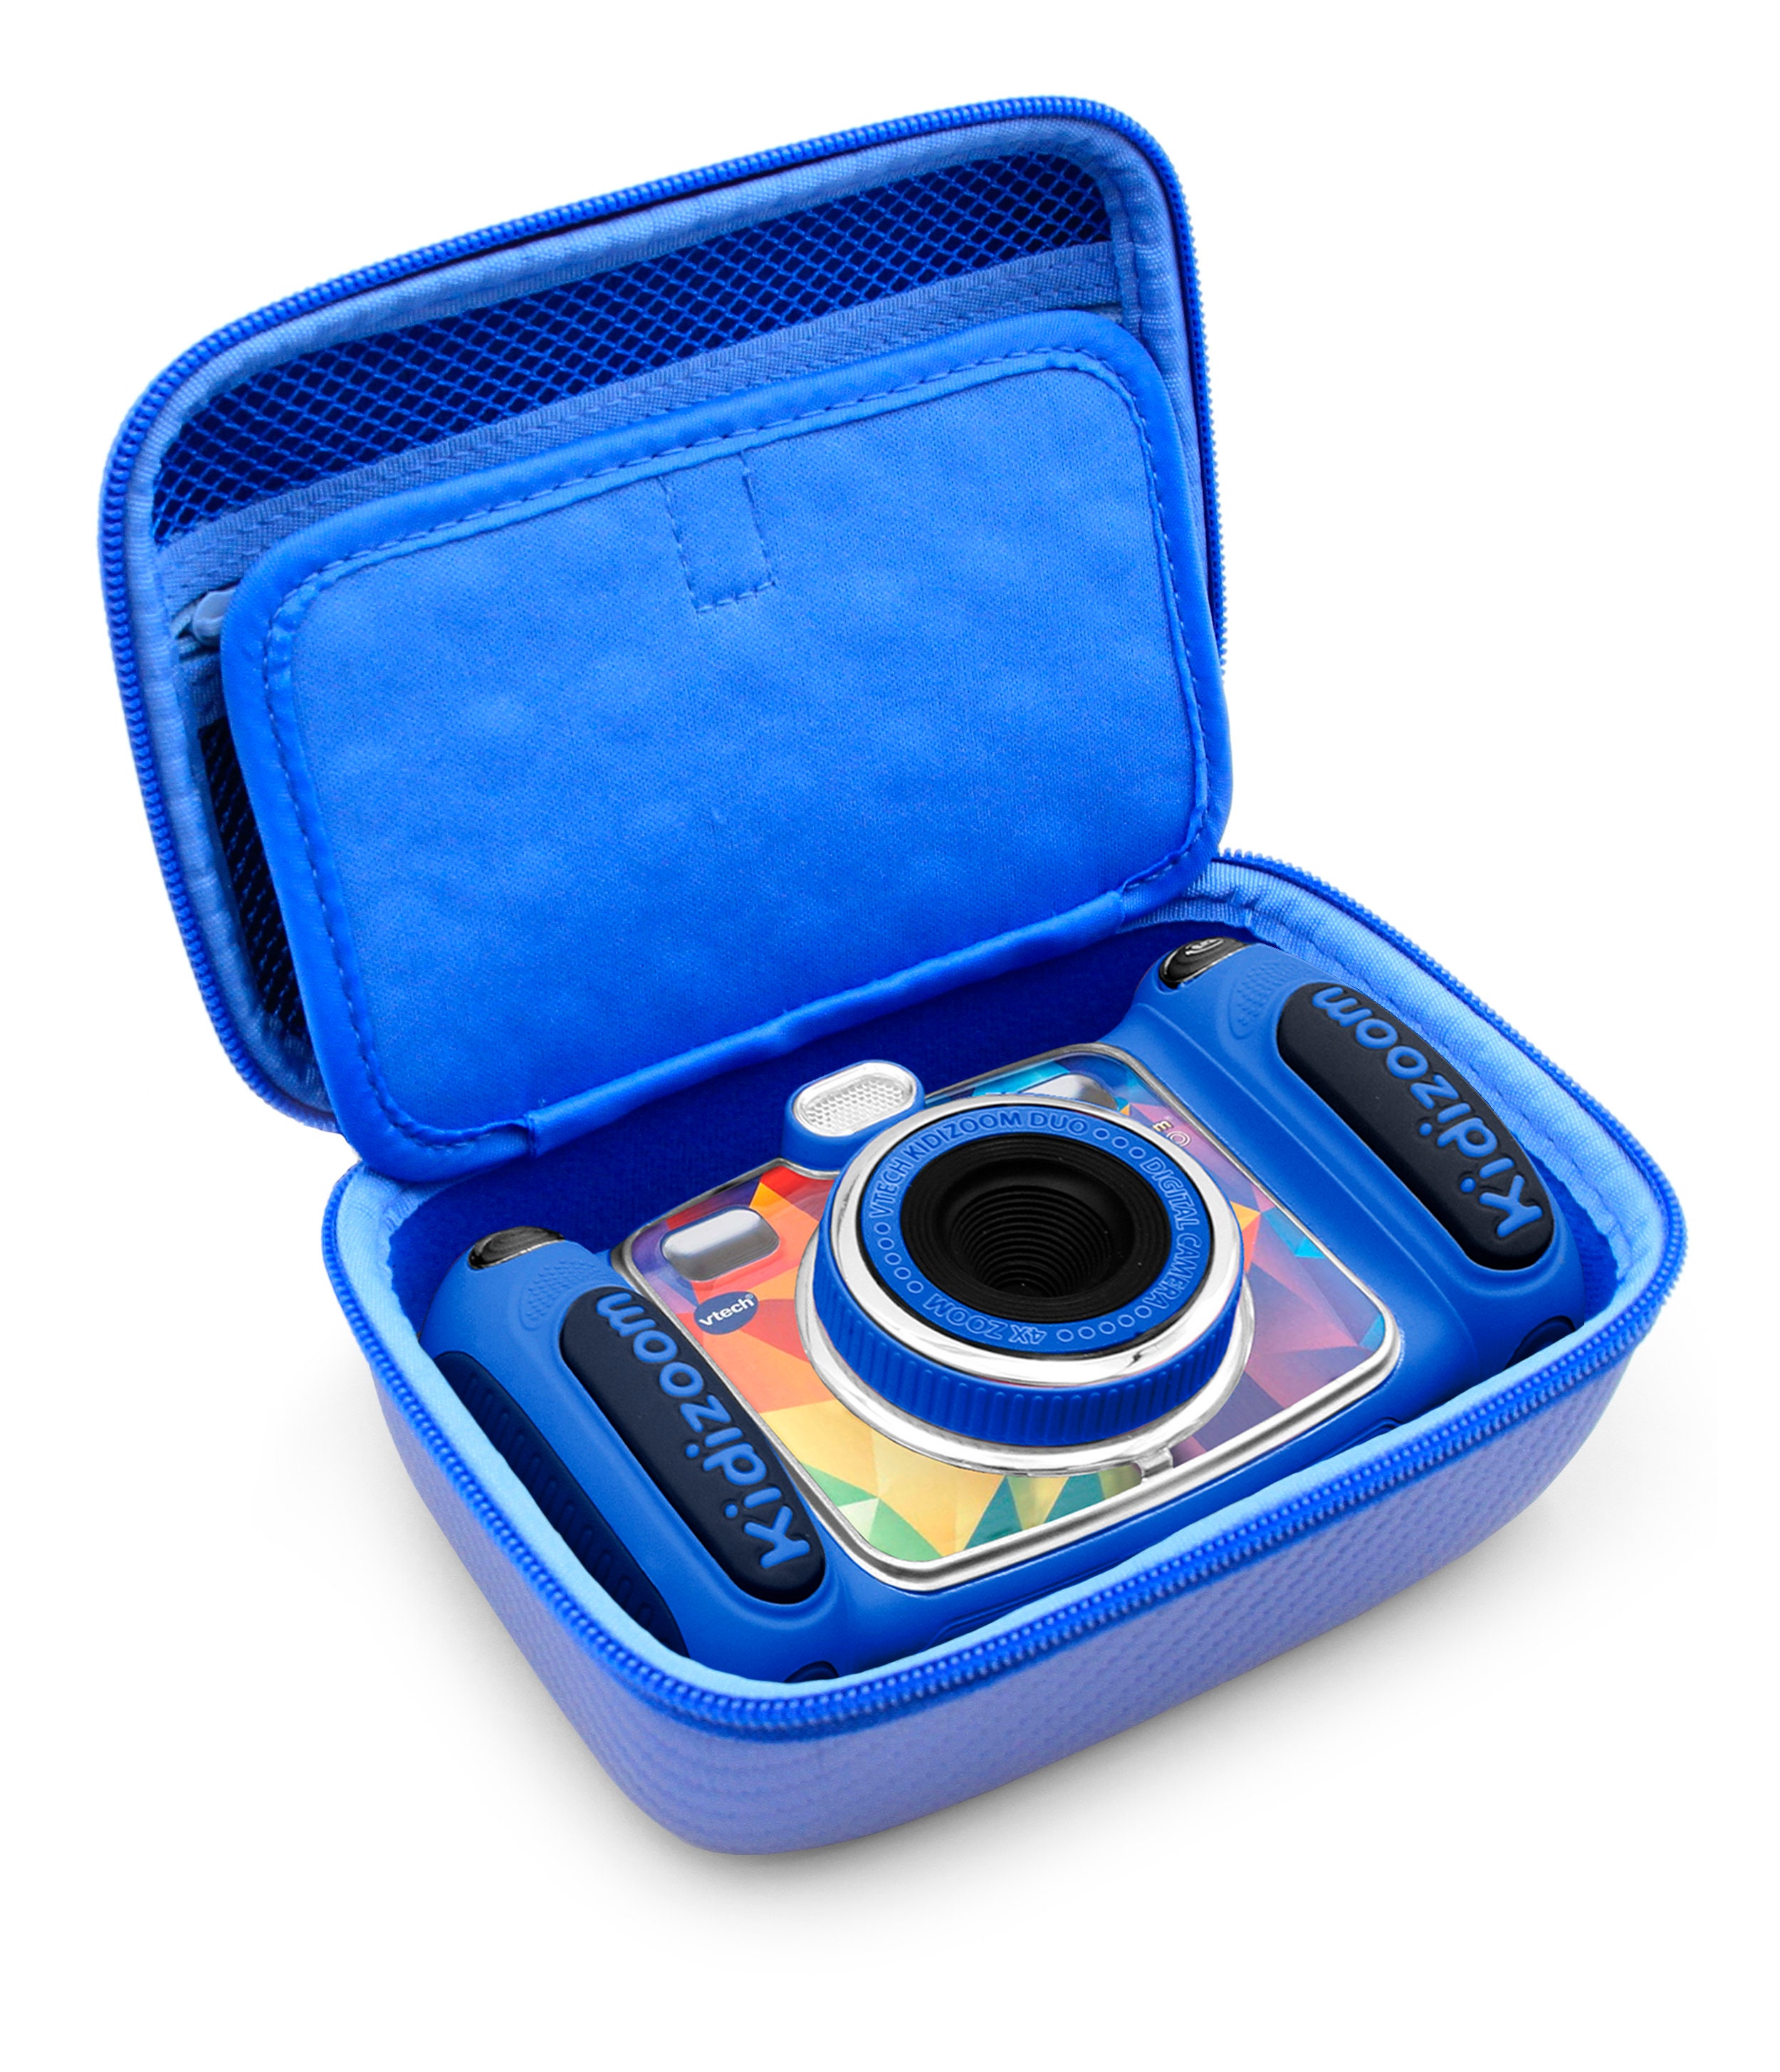 CASEMATIX Toy Camera Case Compatible with VTech Kidizoom Creator Cam Video  Camera and Kidizoom Vtech Camera Accessories, Includes Case Only